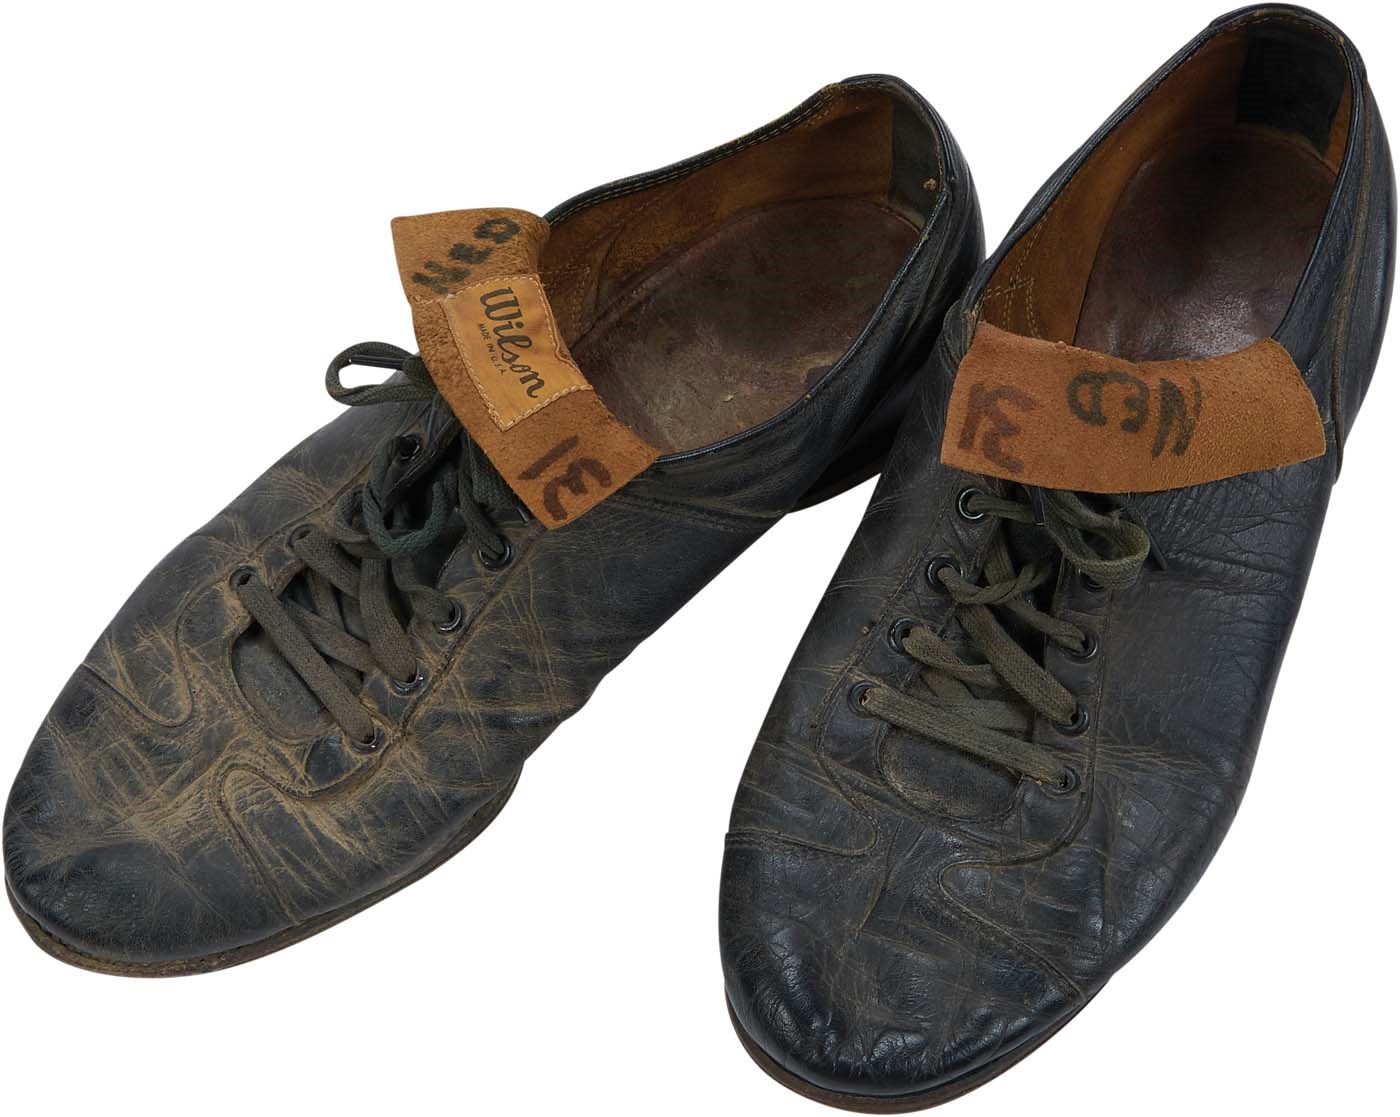 Cleveland Indians - 1950s Ned Garver Game Used Spikes